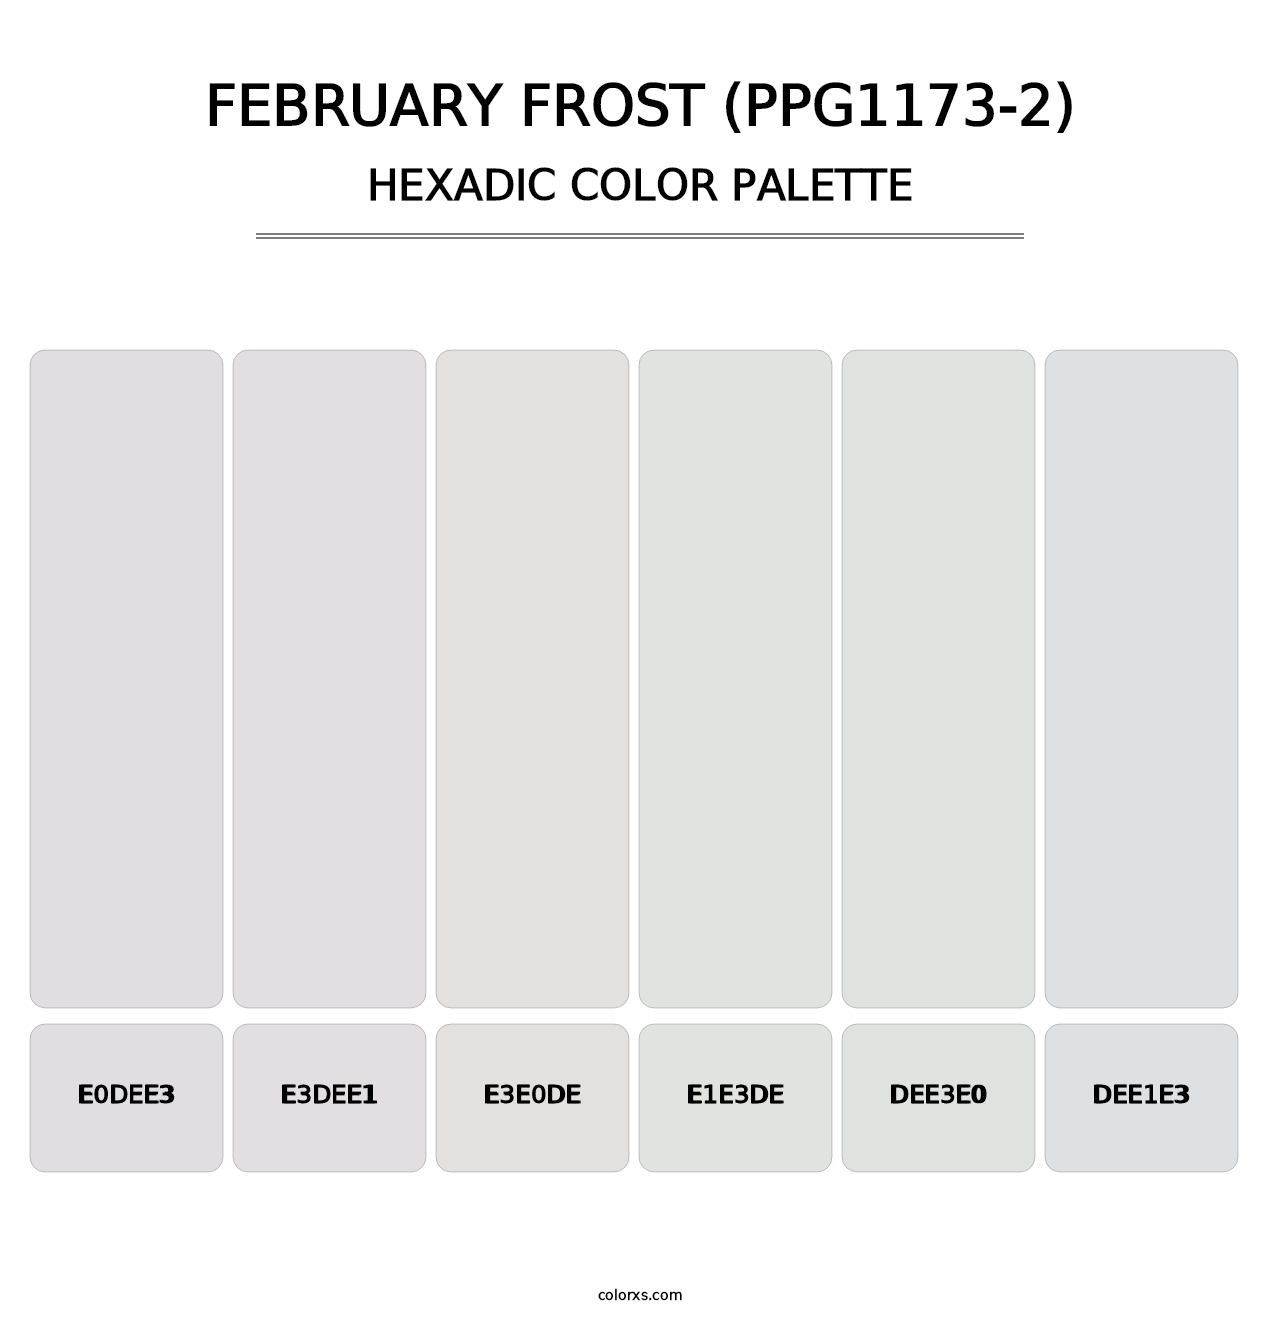 February Frost (PPG1173-2) - Hexadic Color Palette